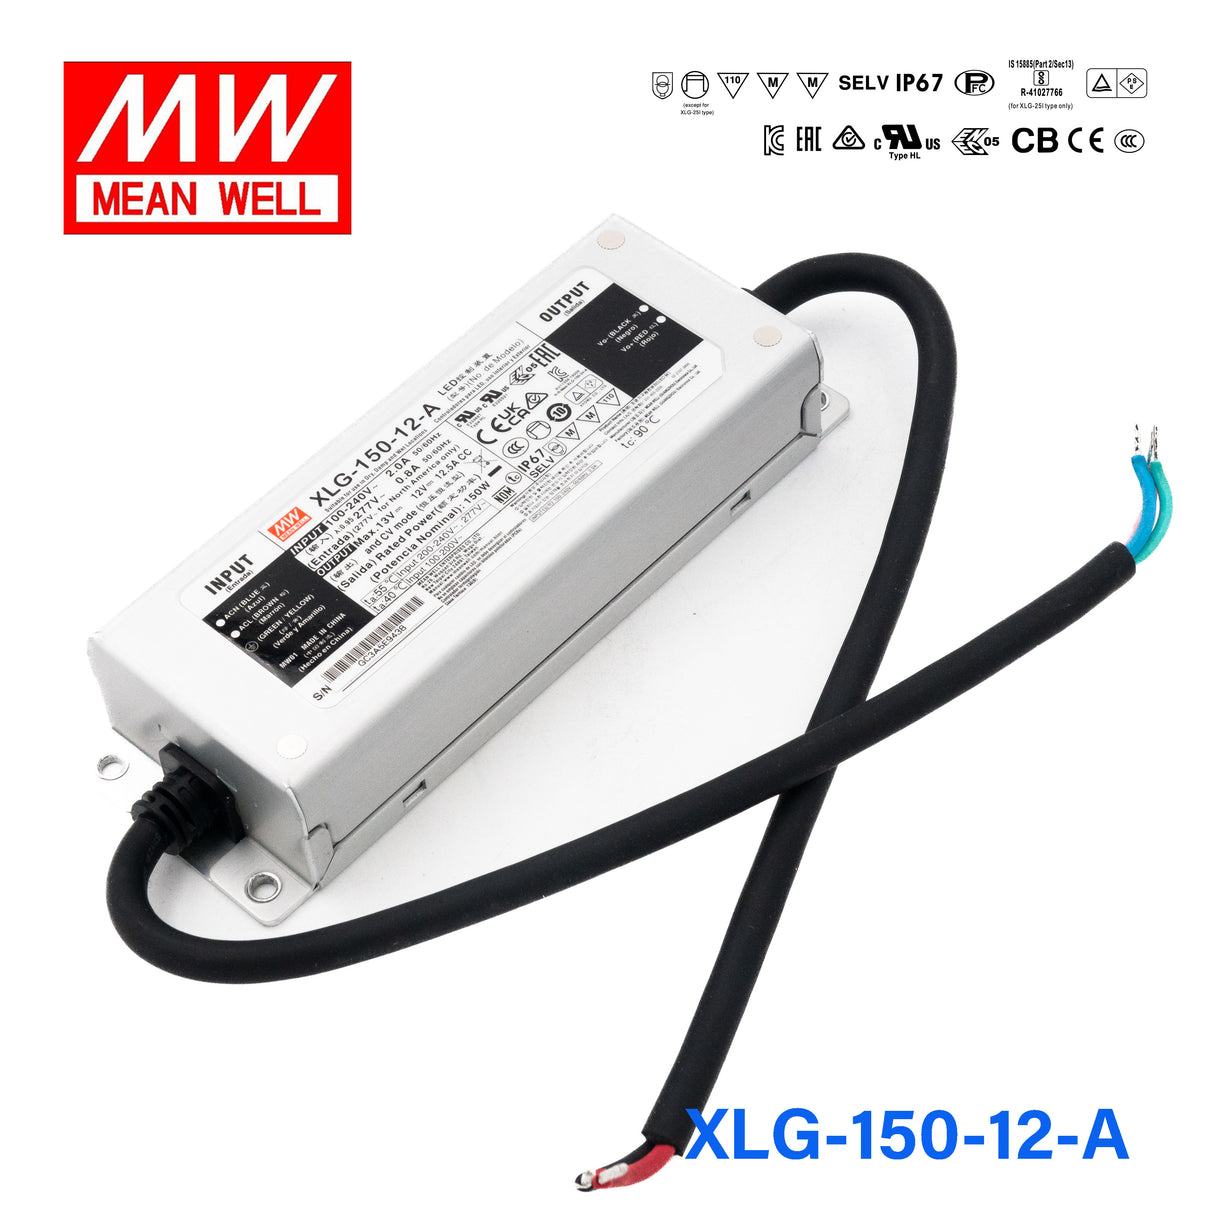 Mean Well XLG-150-12-A Power Supply 150W 12V - Adjustable